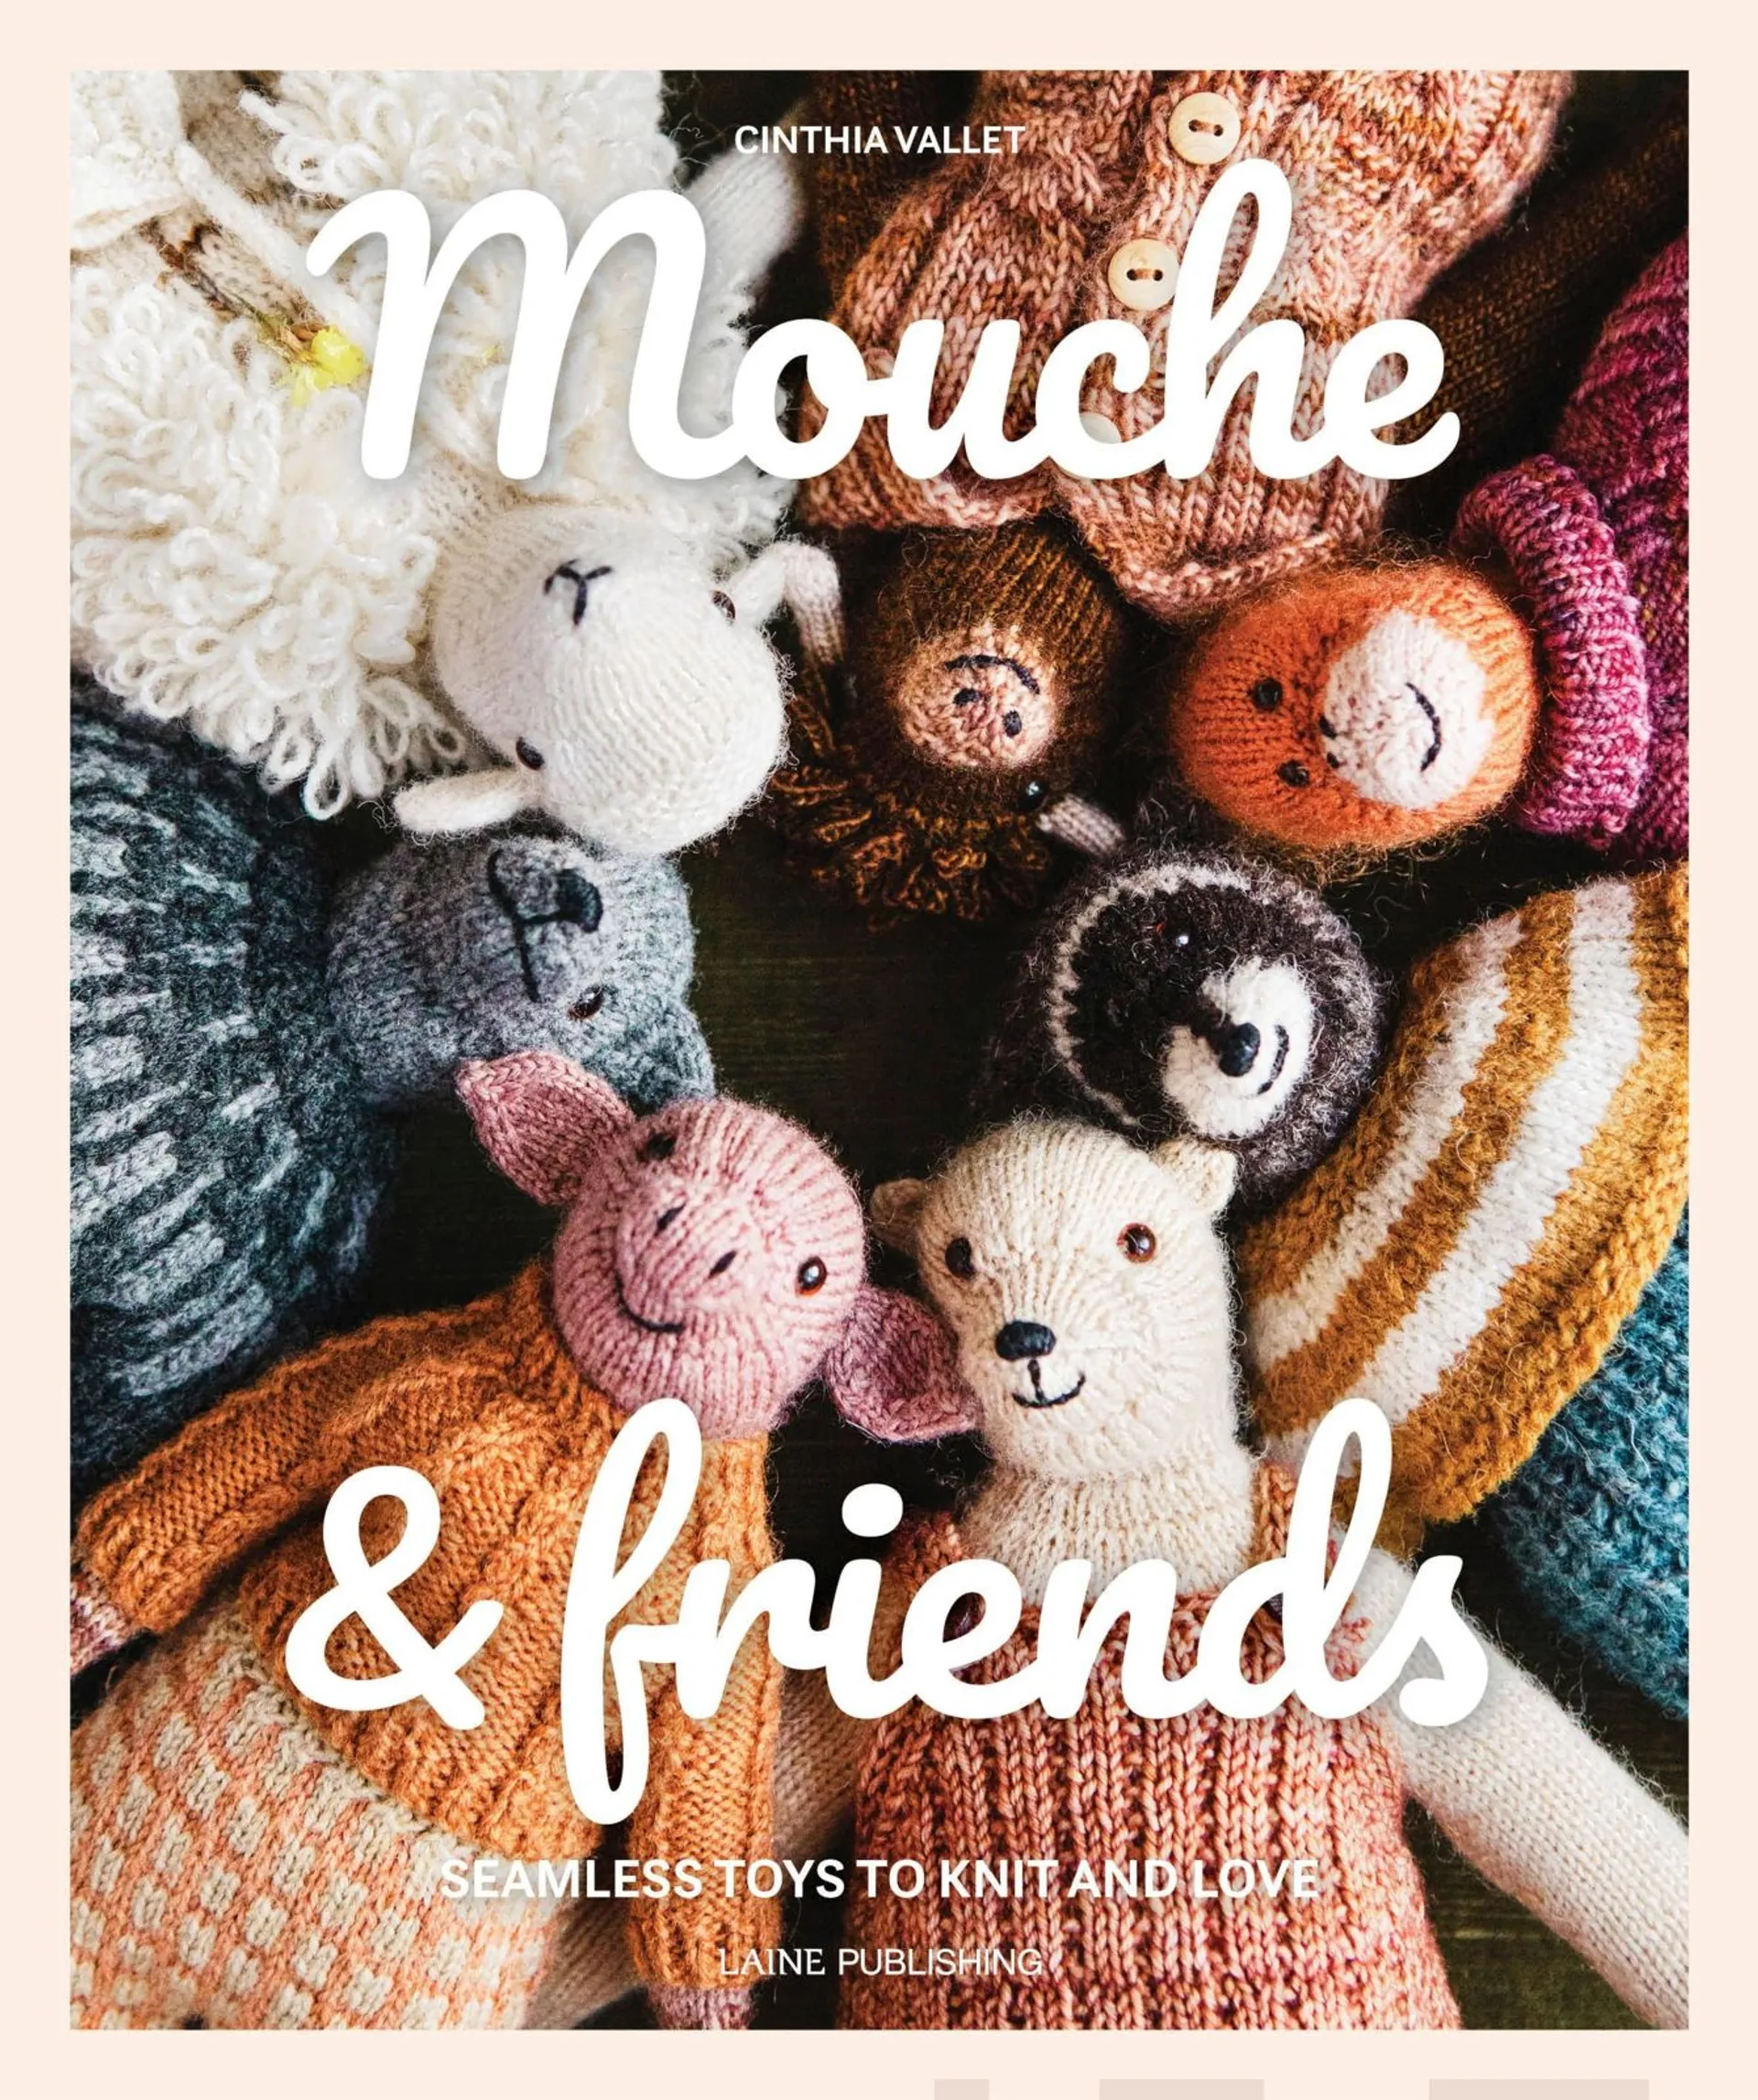 Vallet, Mouche & Friends - Seamless Toys to Knit and Love